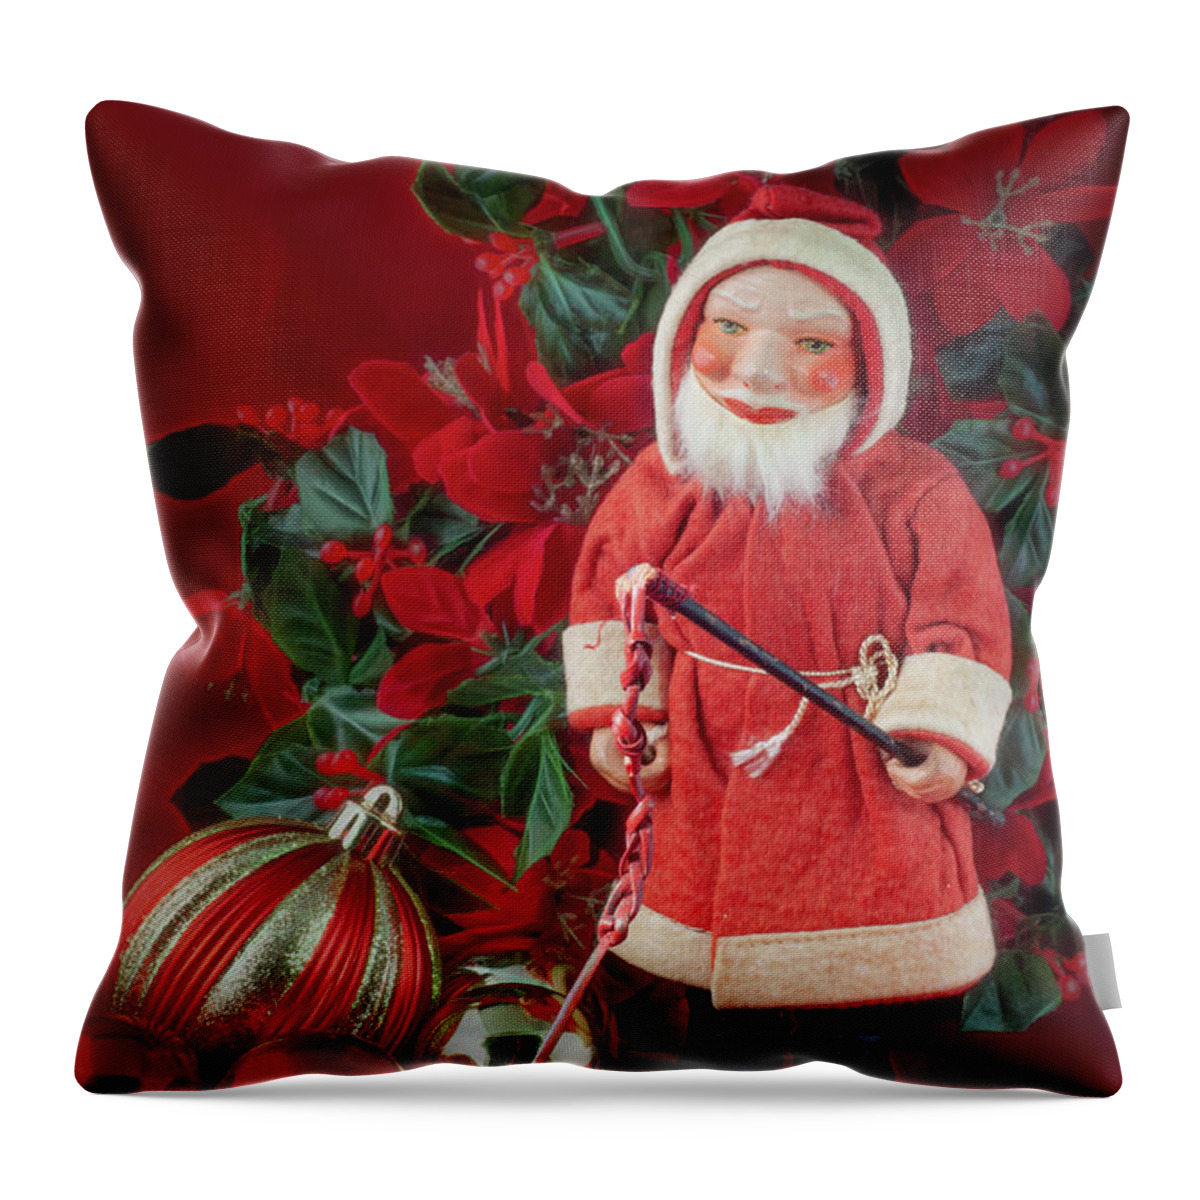 Santa Throw Pillow featuring the photograph Santa With Baubles by Cordia Murphy